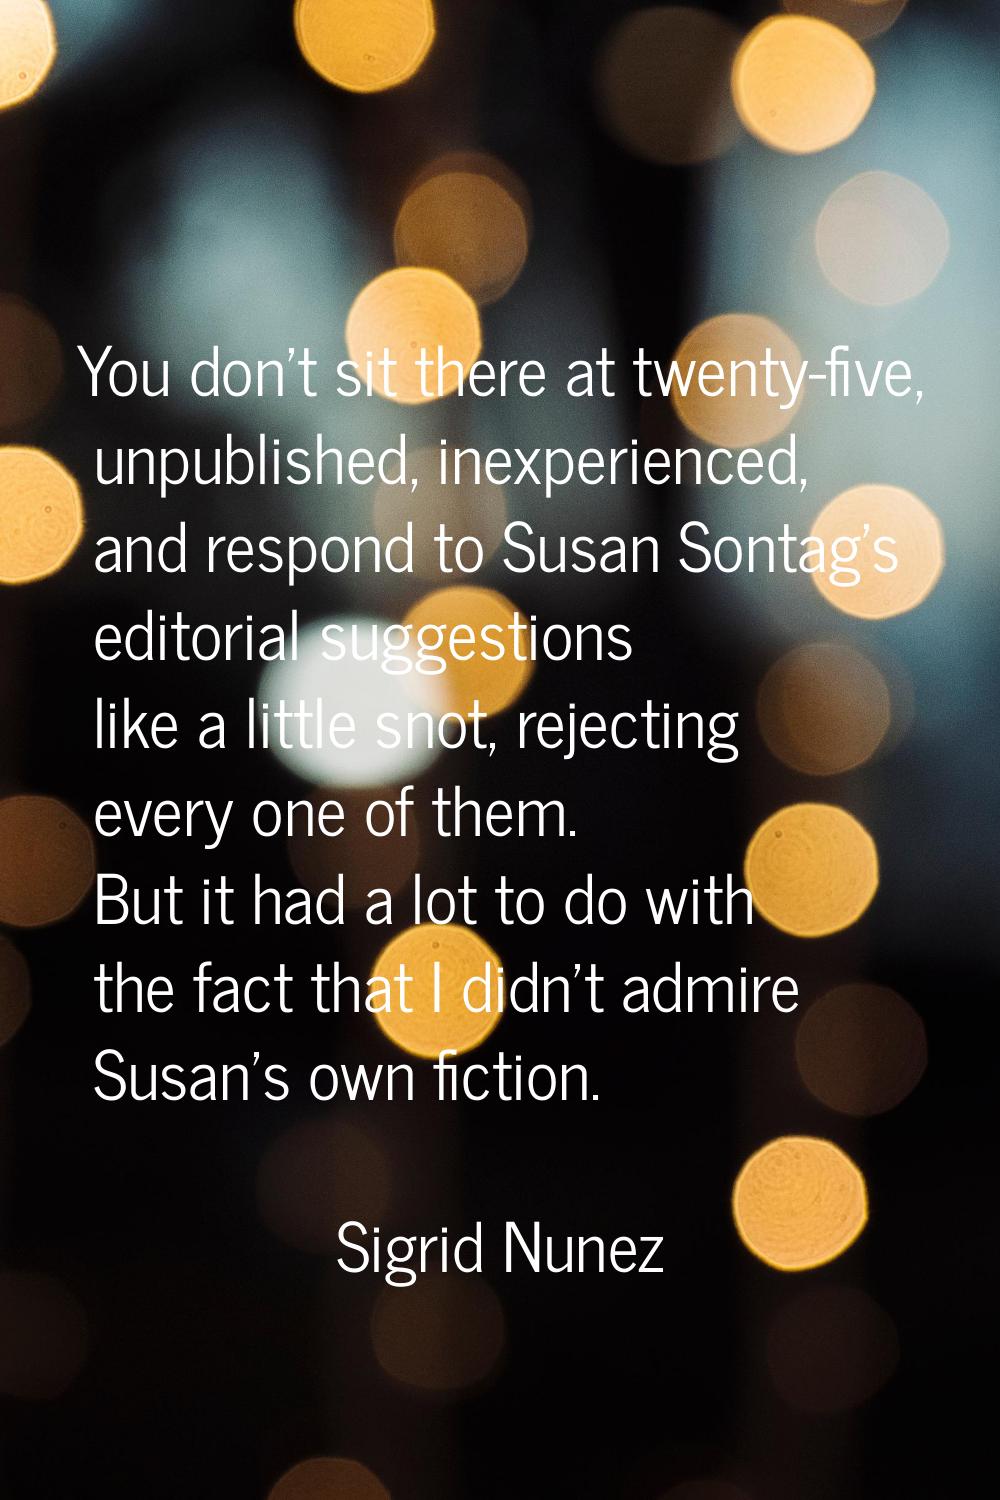 You don't sit there at twenty-five, unpublished, inexperienced, and respond to Susan Sontag's edito